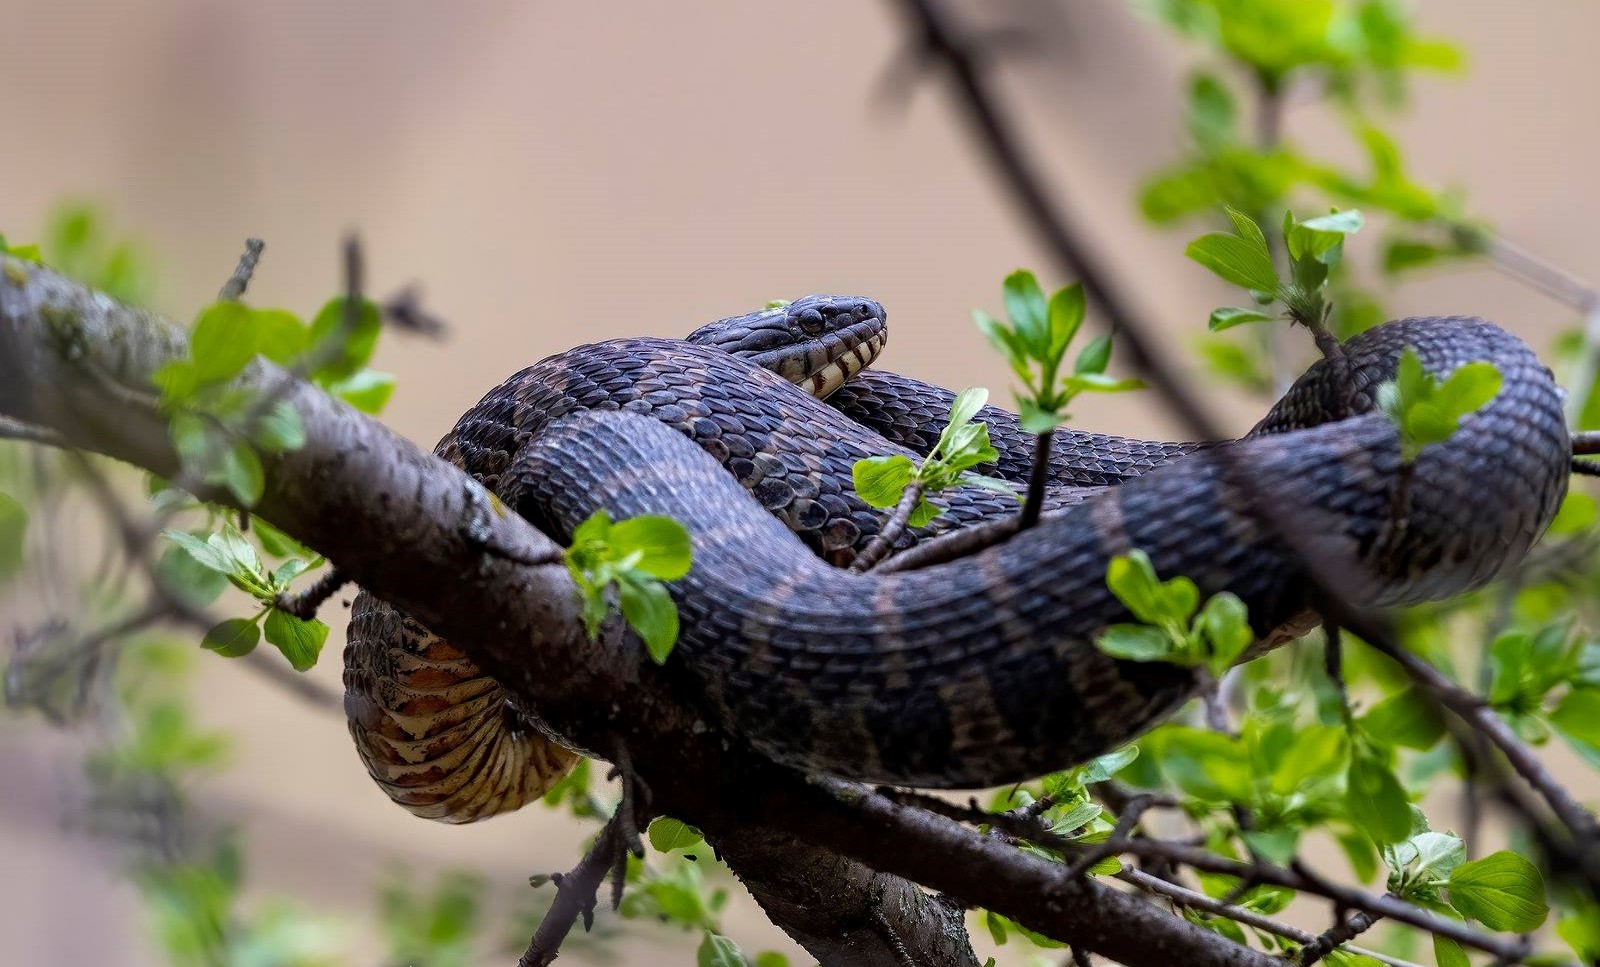 A northern water snake coiled up in a tree.